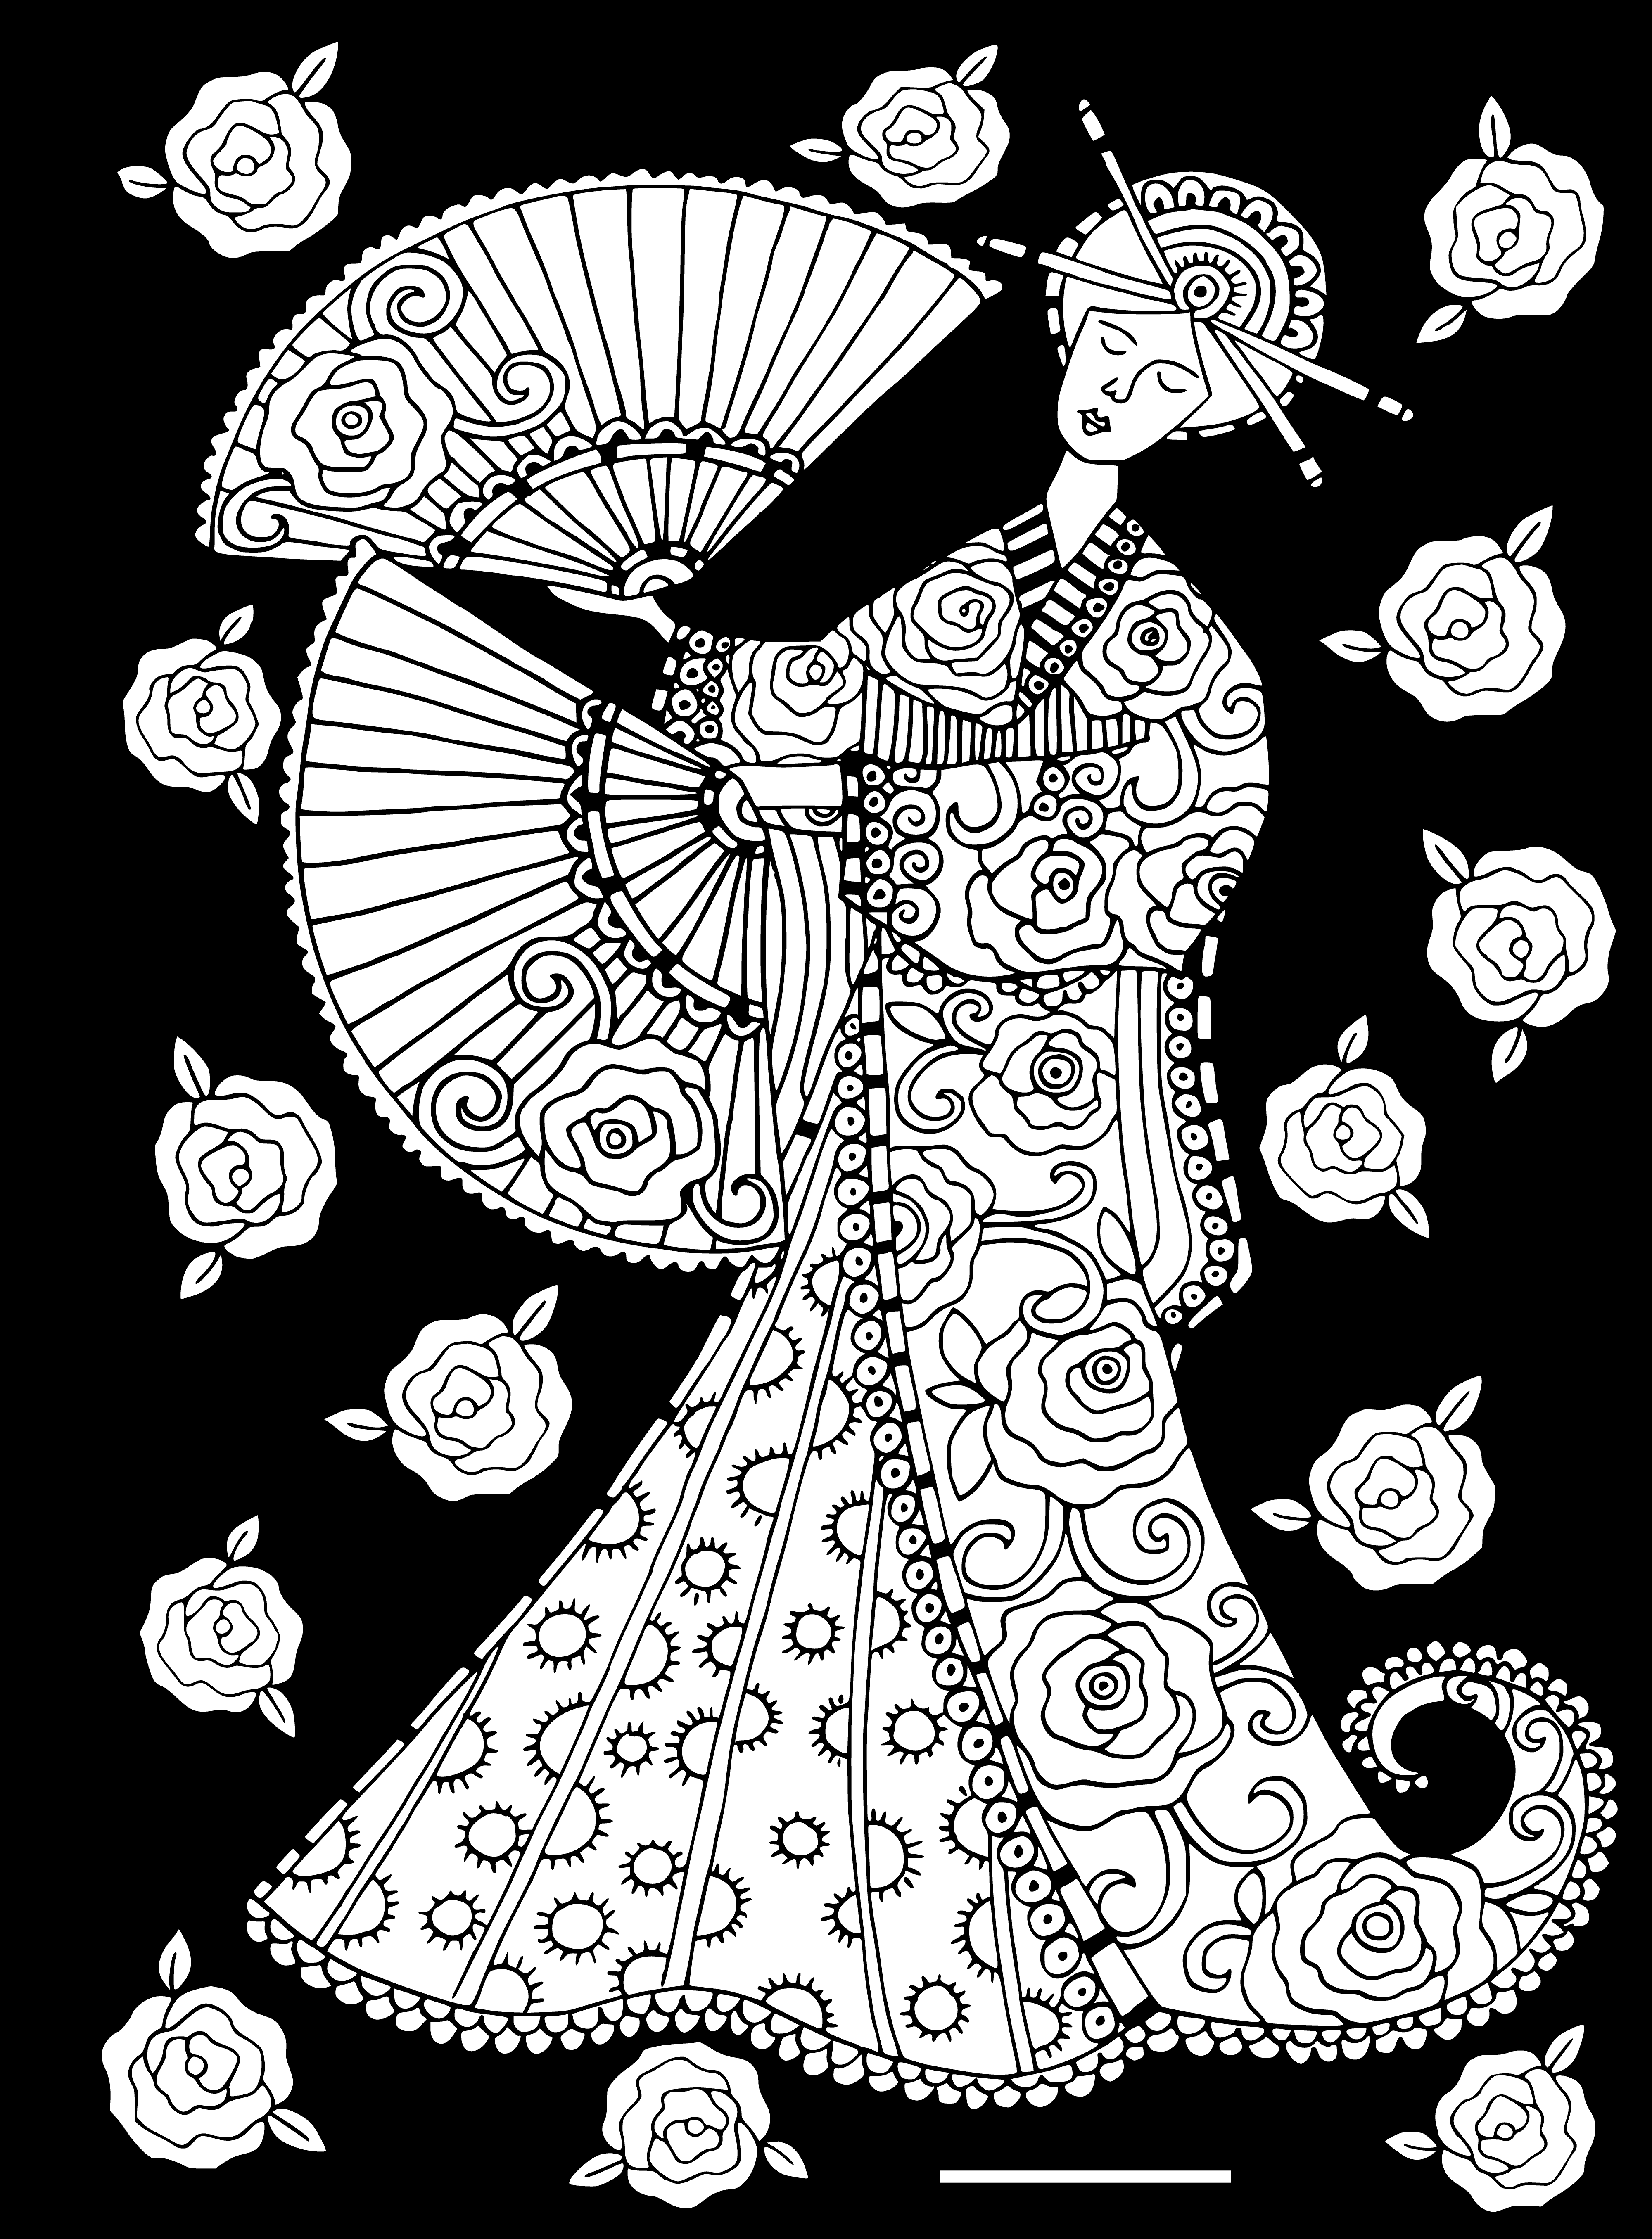 coloring page: Young woman standing in fan's breeze, wearing flowy dress and serene expression.